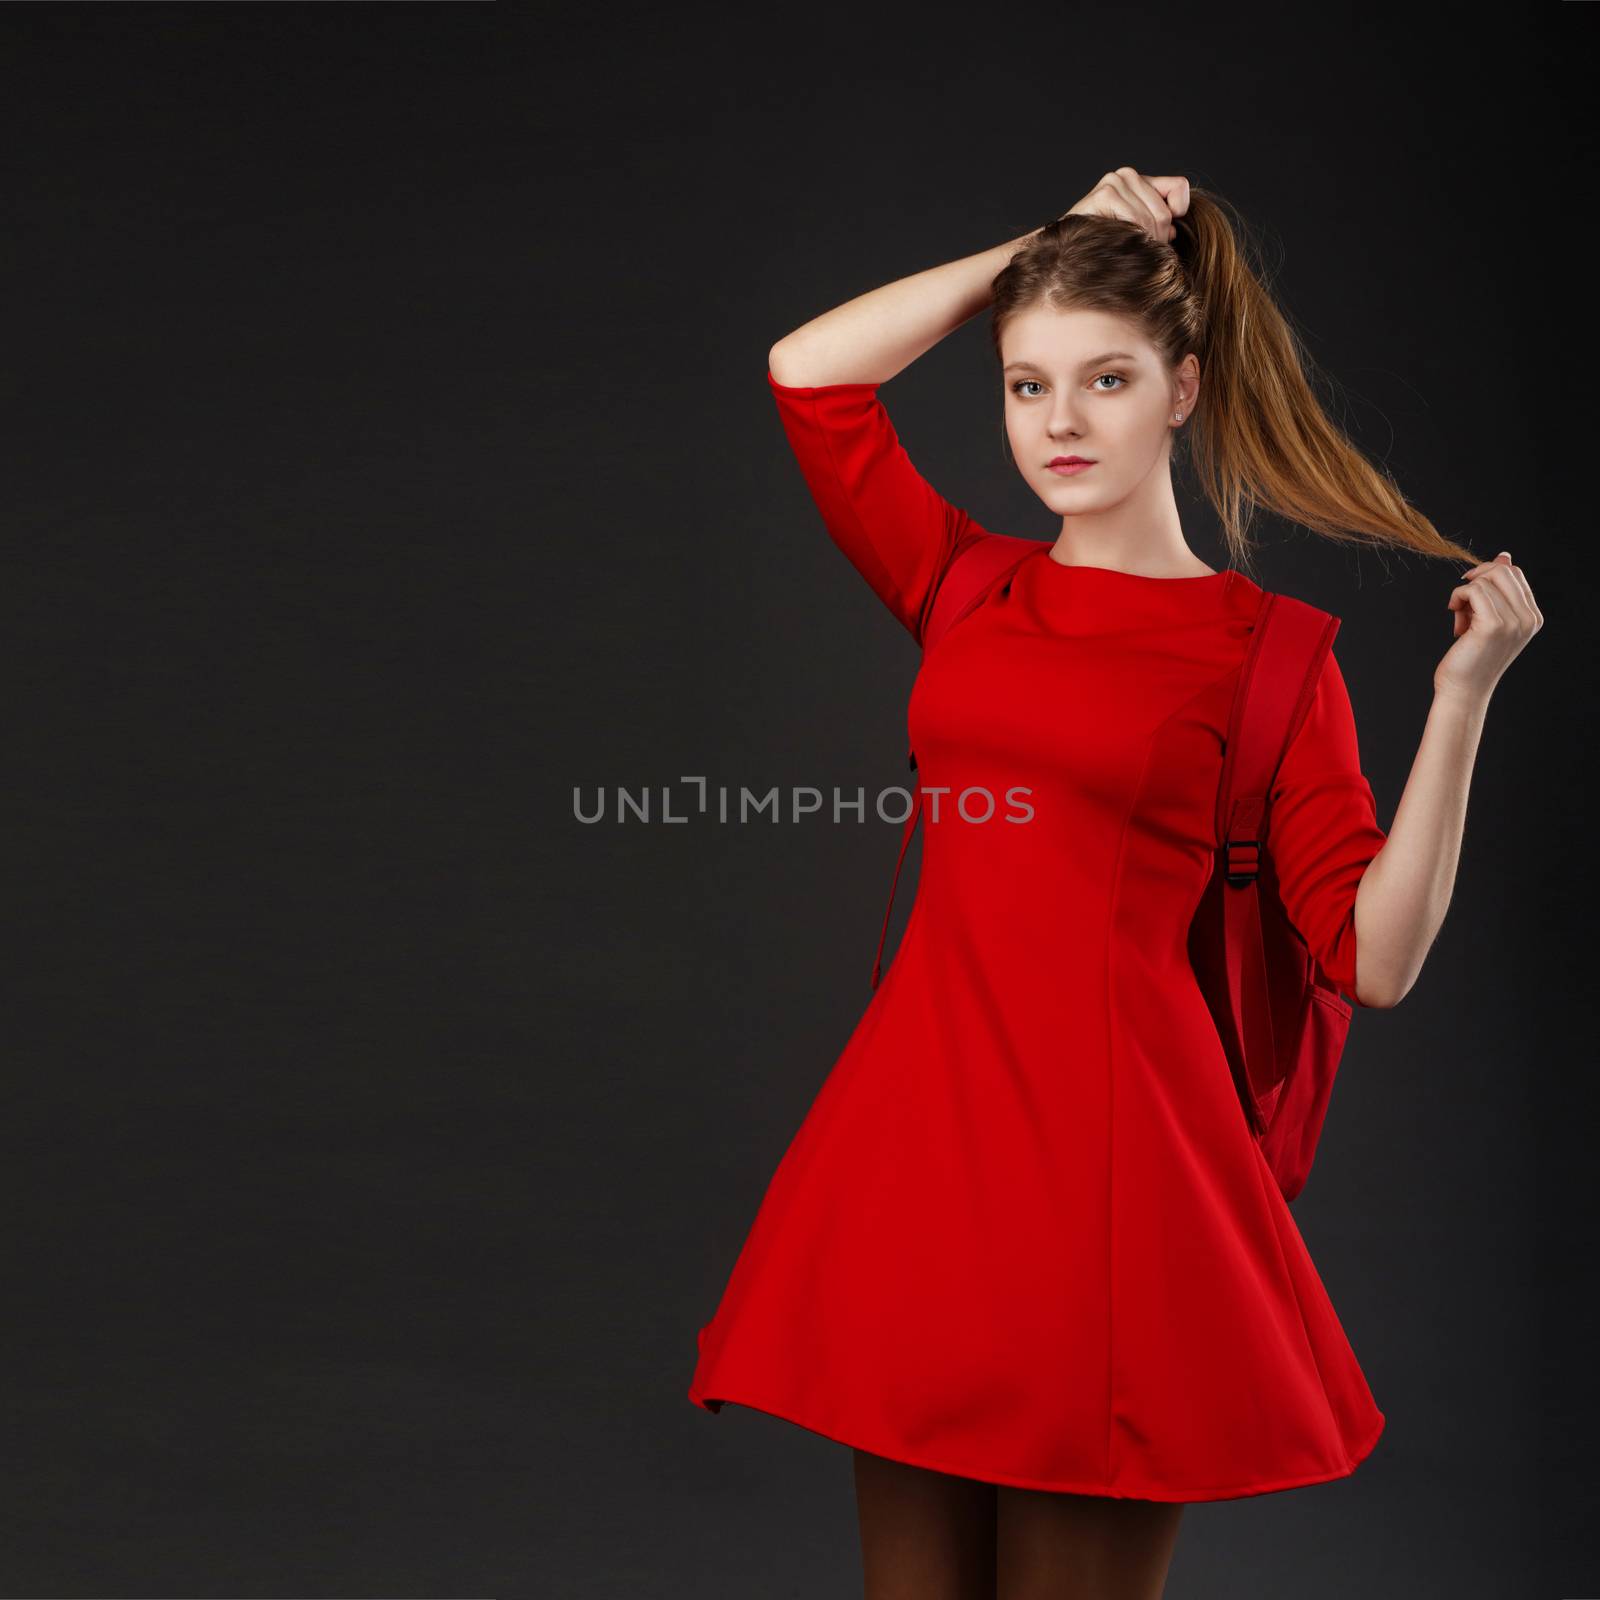 Portrait of a girl with long hair in a red dress by natazhekova